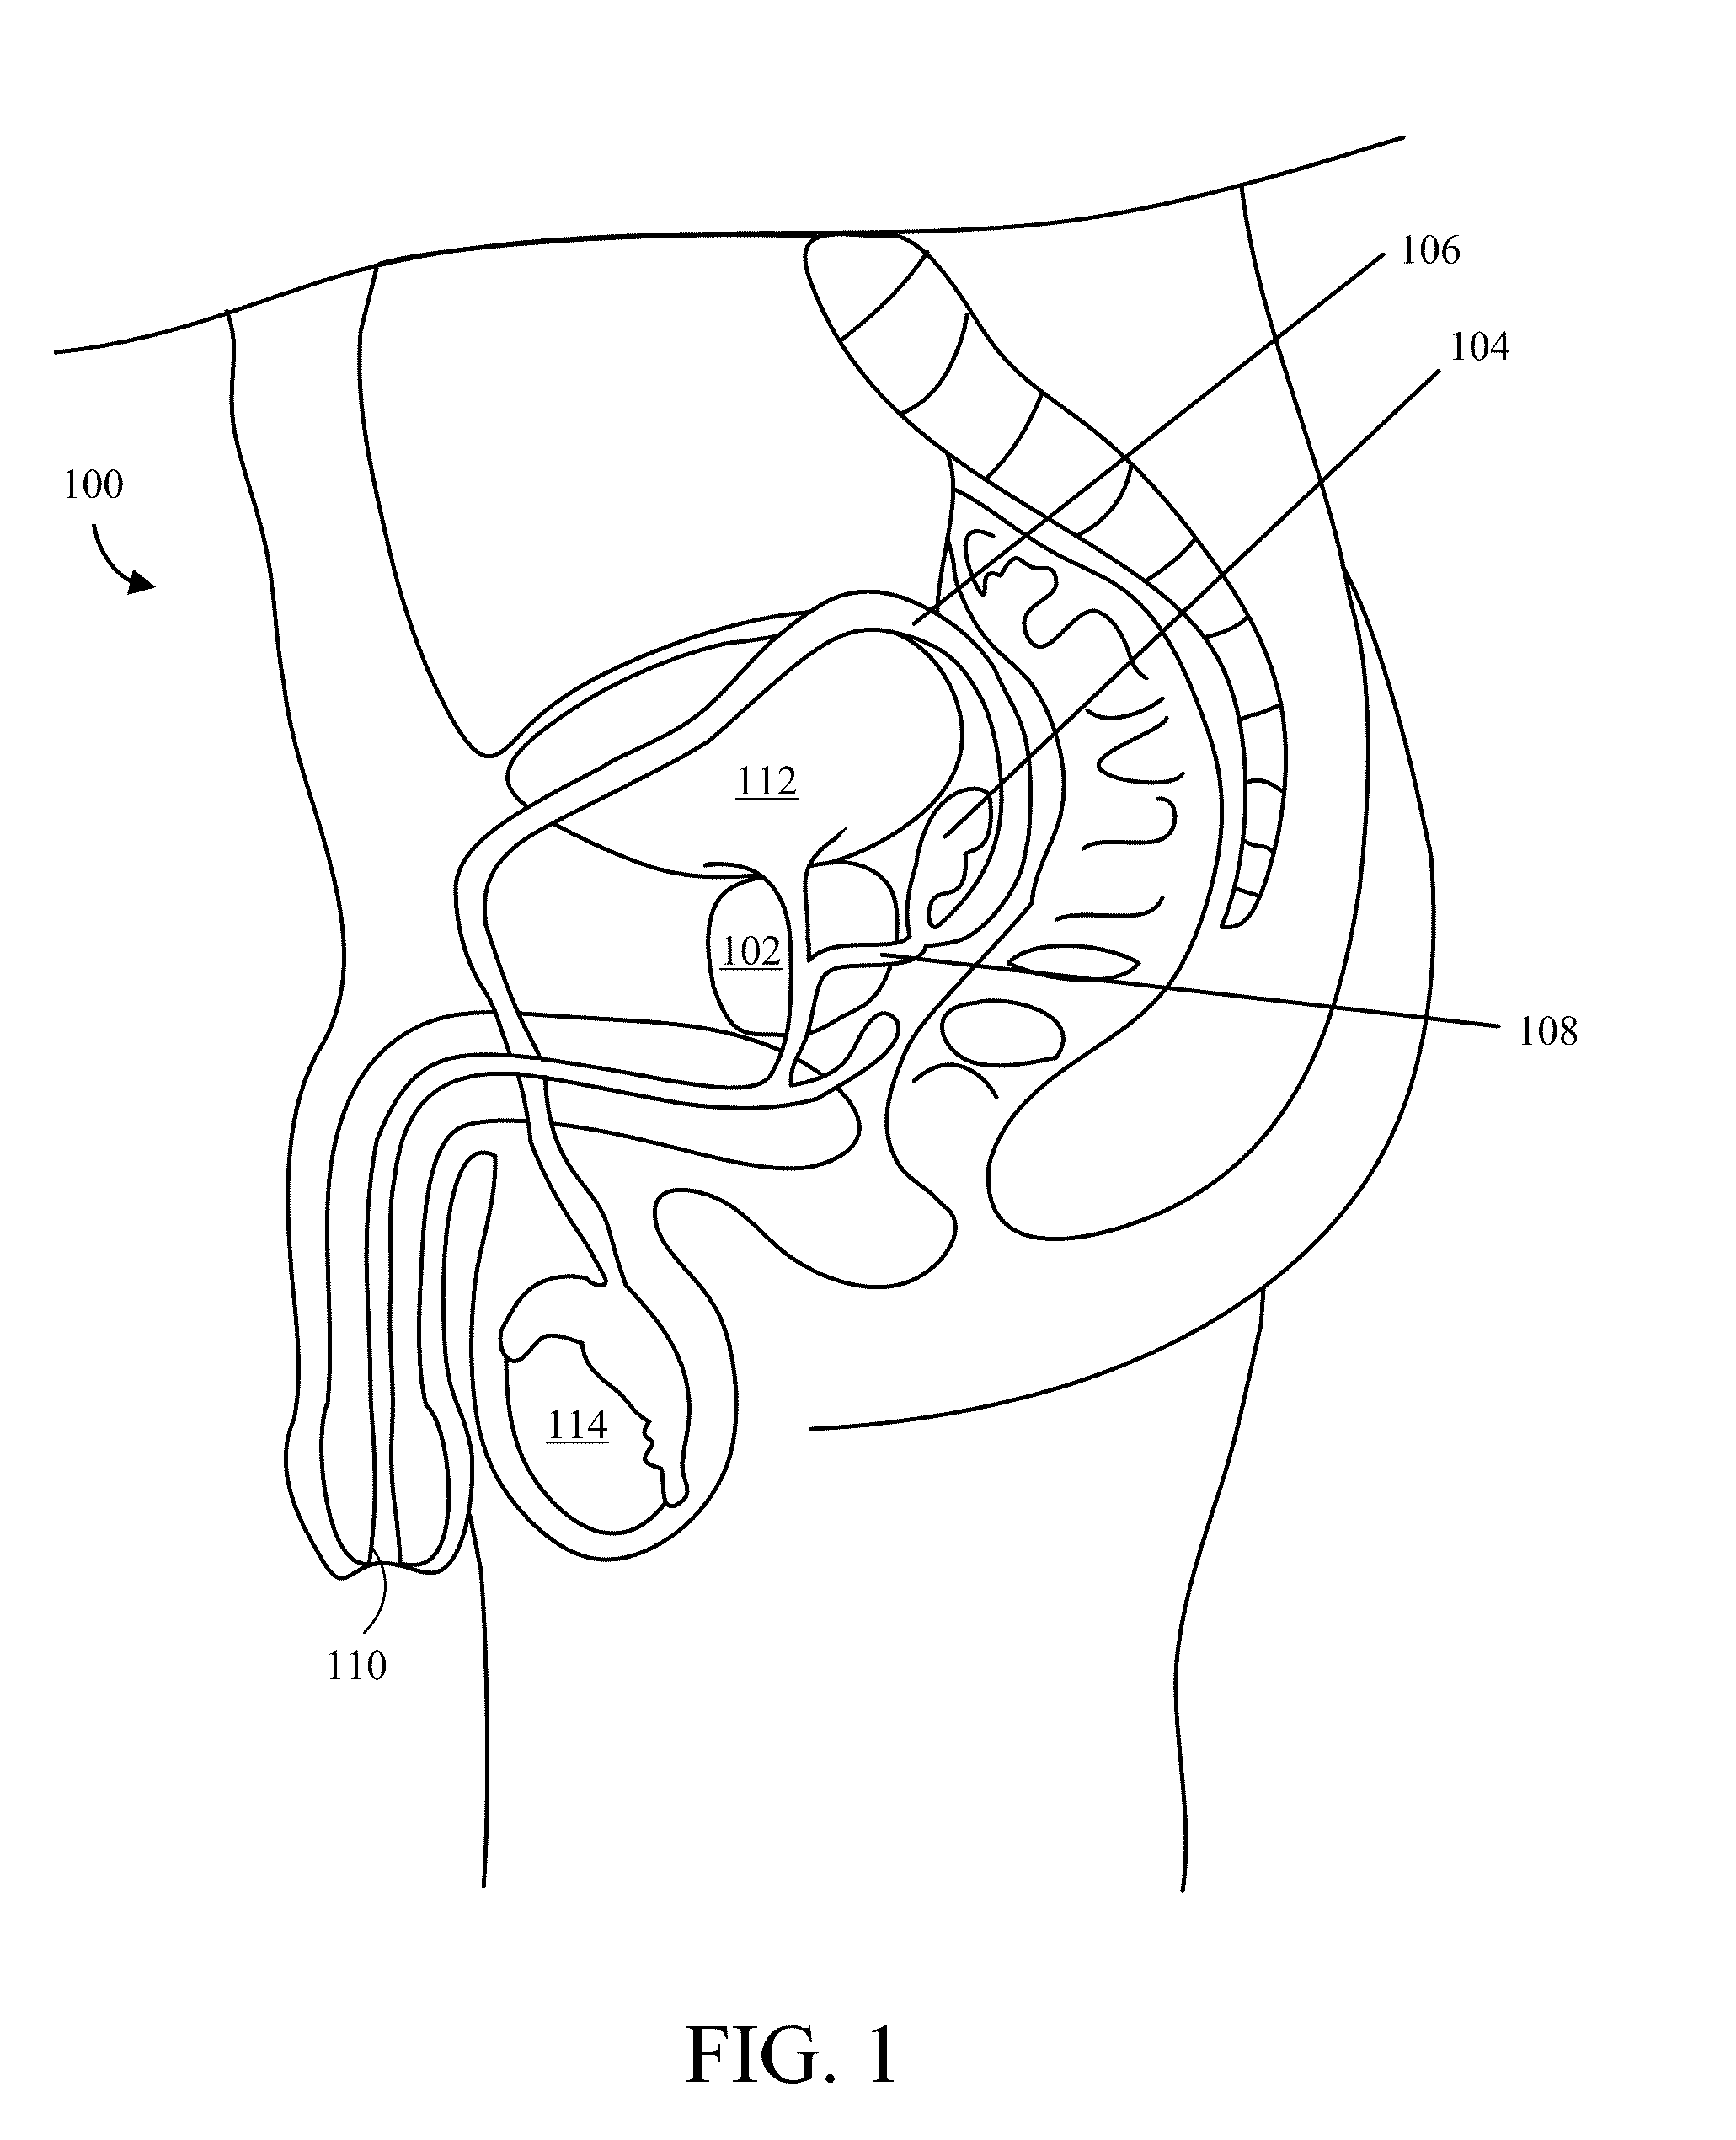 Implantable Drug Delivery Device and Methods of Treating Male Genitourinary and Surrounding Tissues